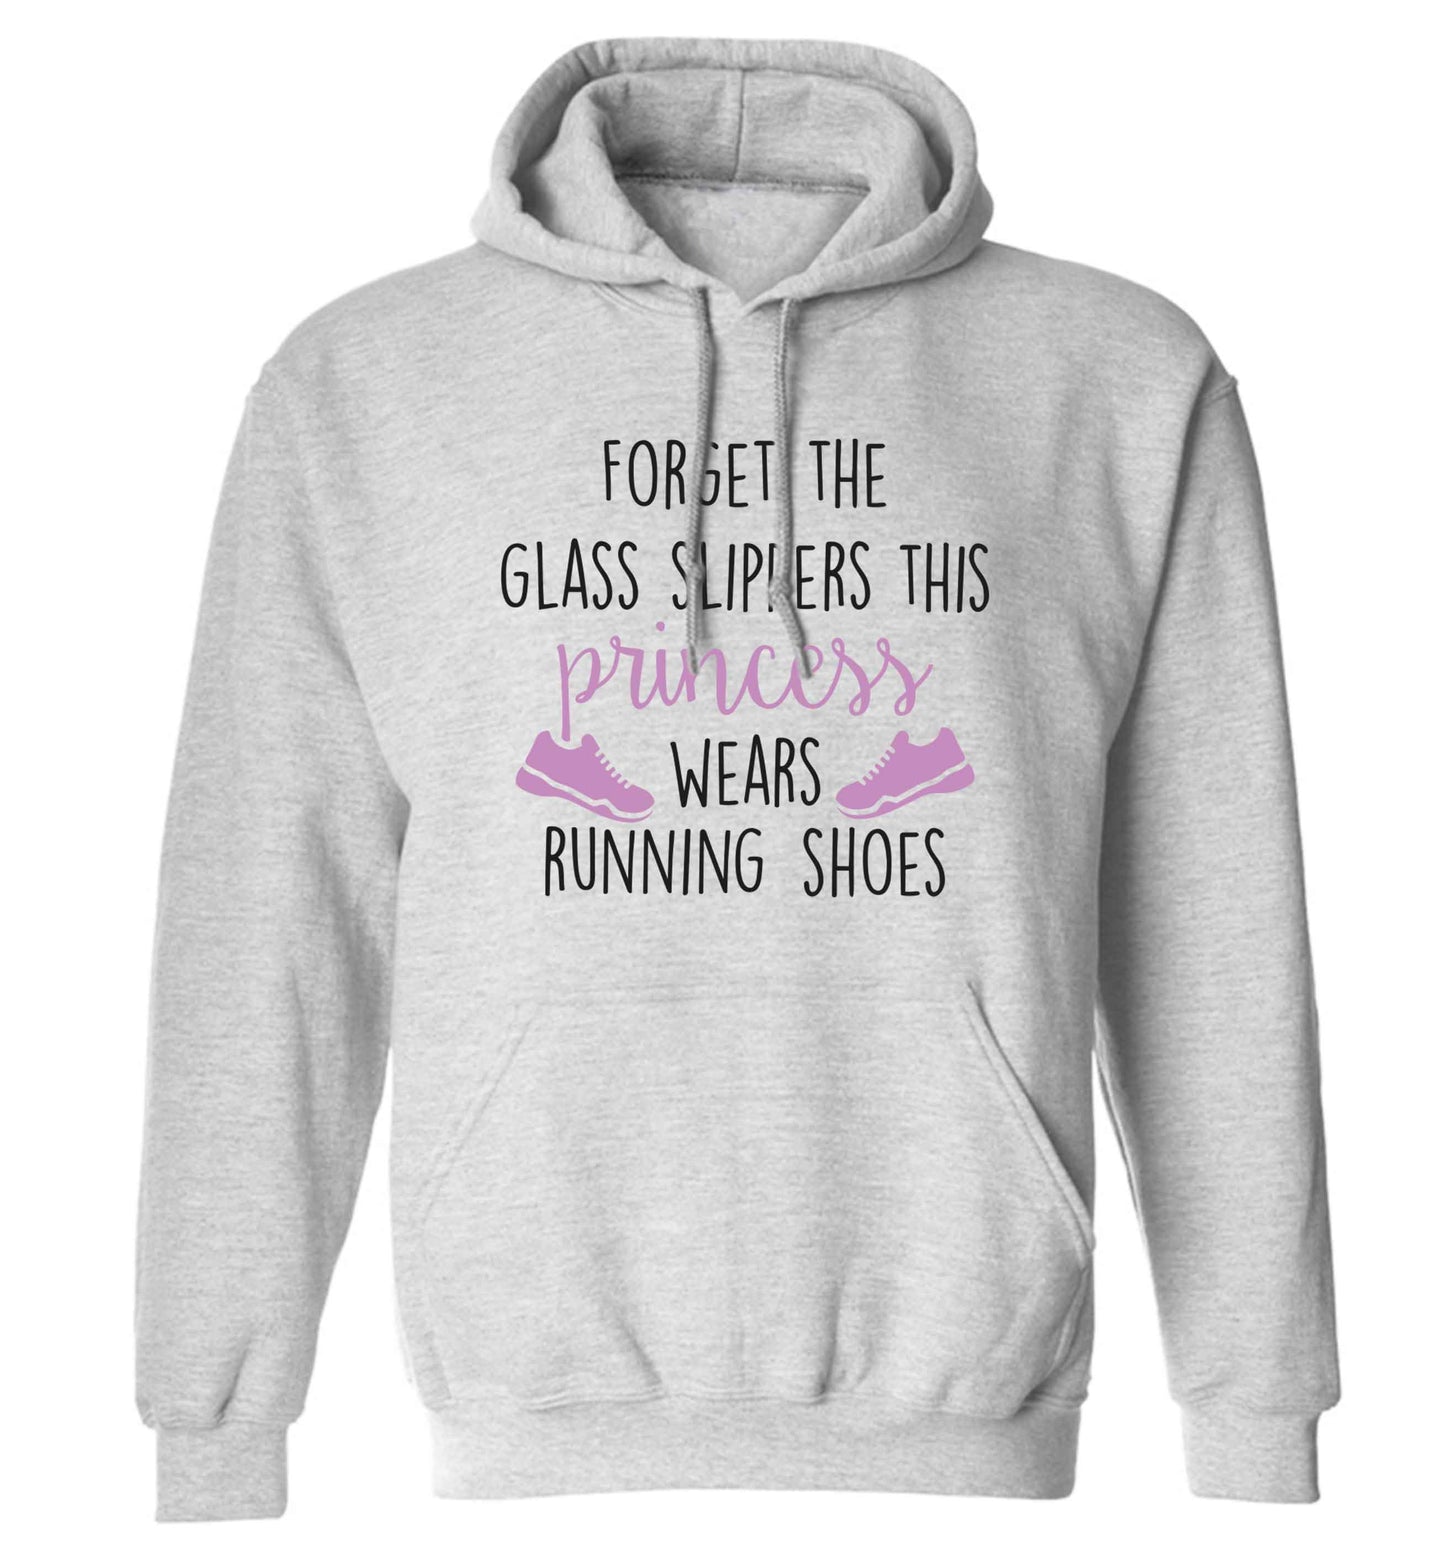 Forget the glass slippers this princess wears running shoes adults unisex grey hoodie 2XL